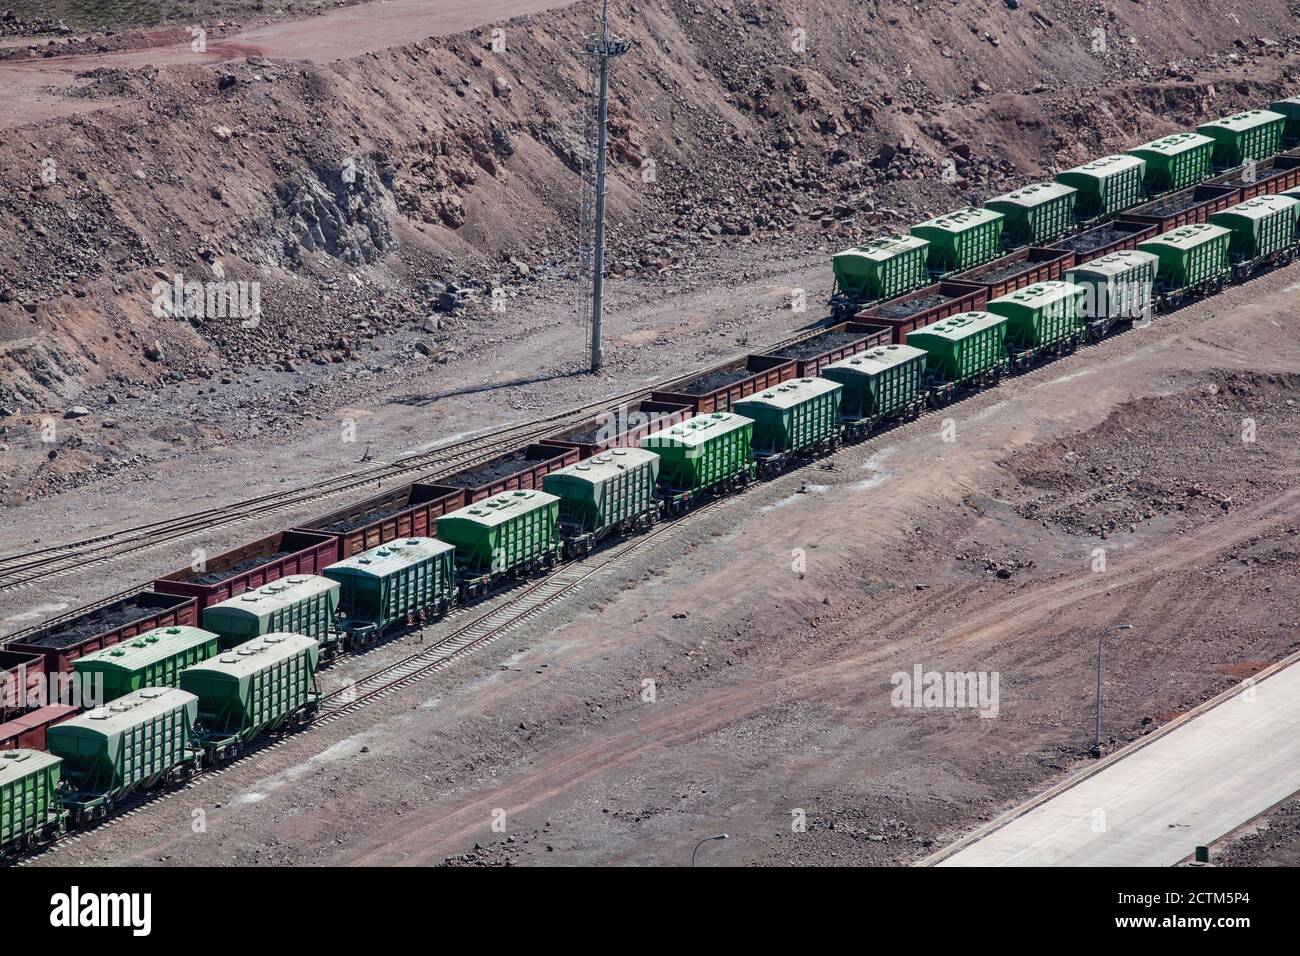 Cargo railroad terminal. Railway carriages on track. Green and brown rail wagons in desert. Rail freight transportation. Stock Photo